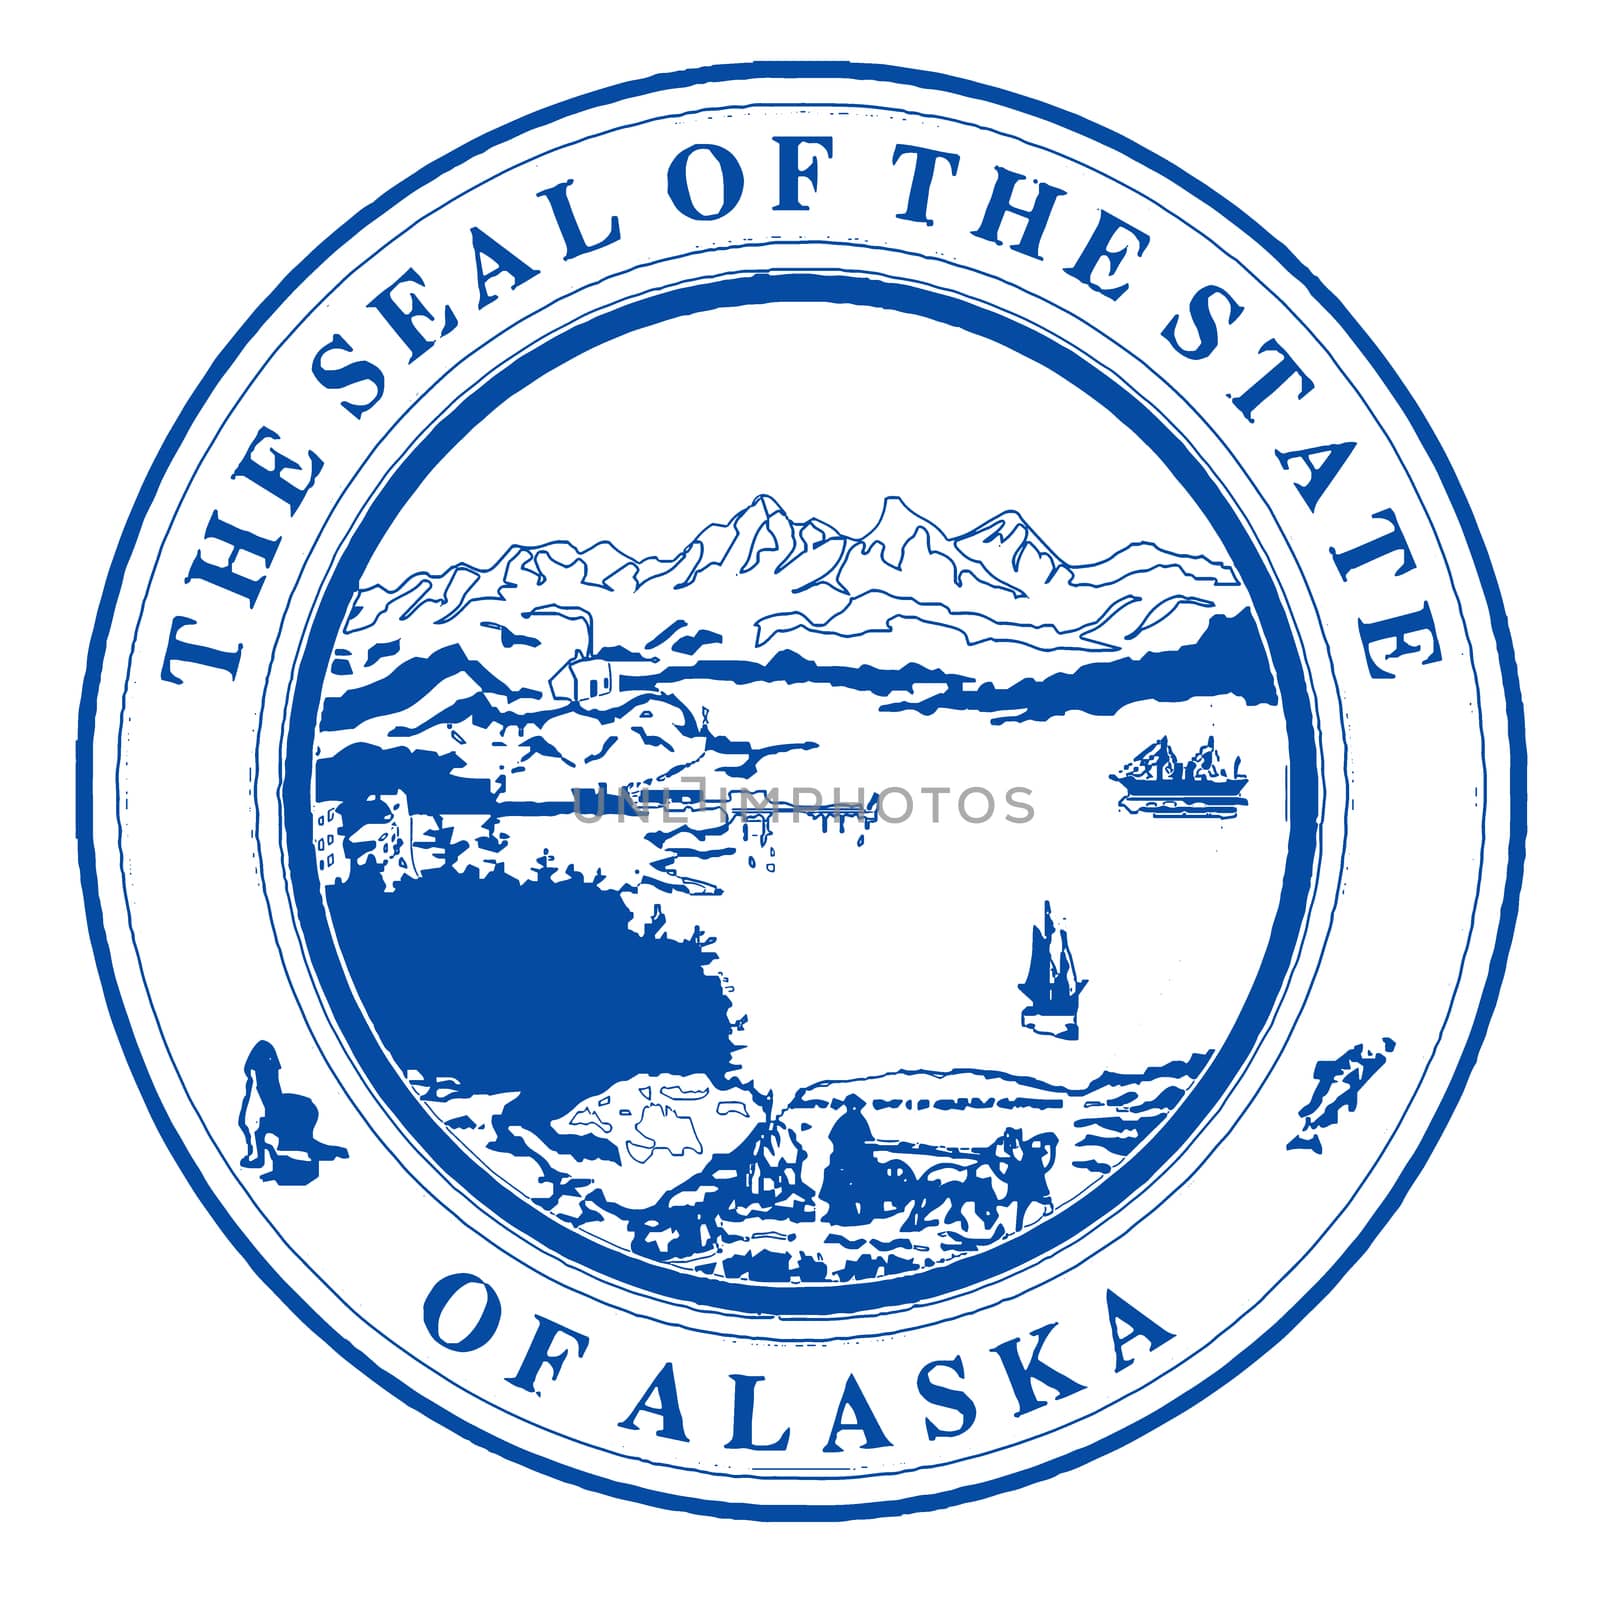 Seal of Alaska over a white background